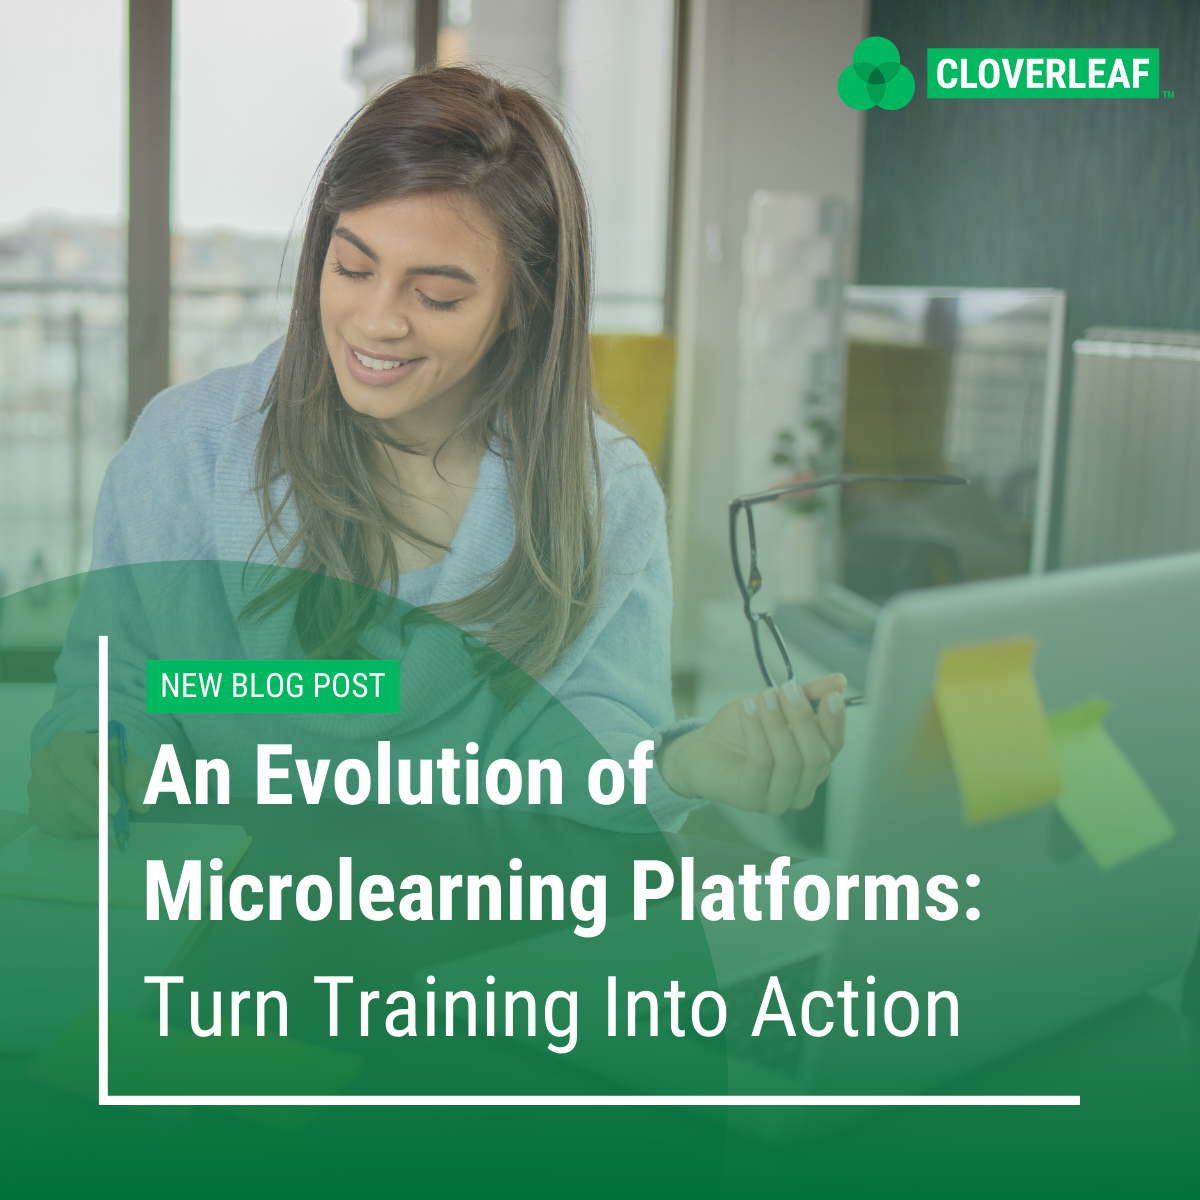 Microlearning Platforms